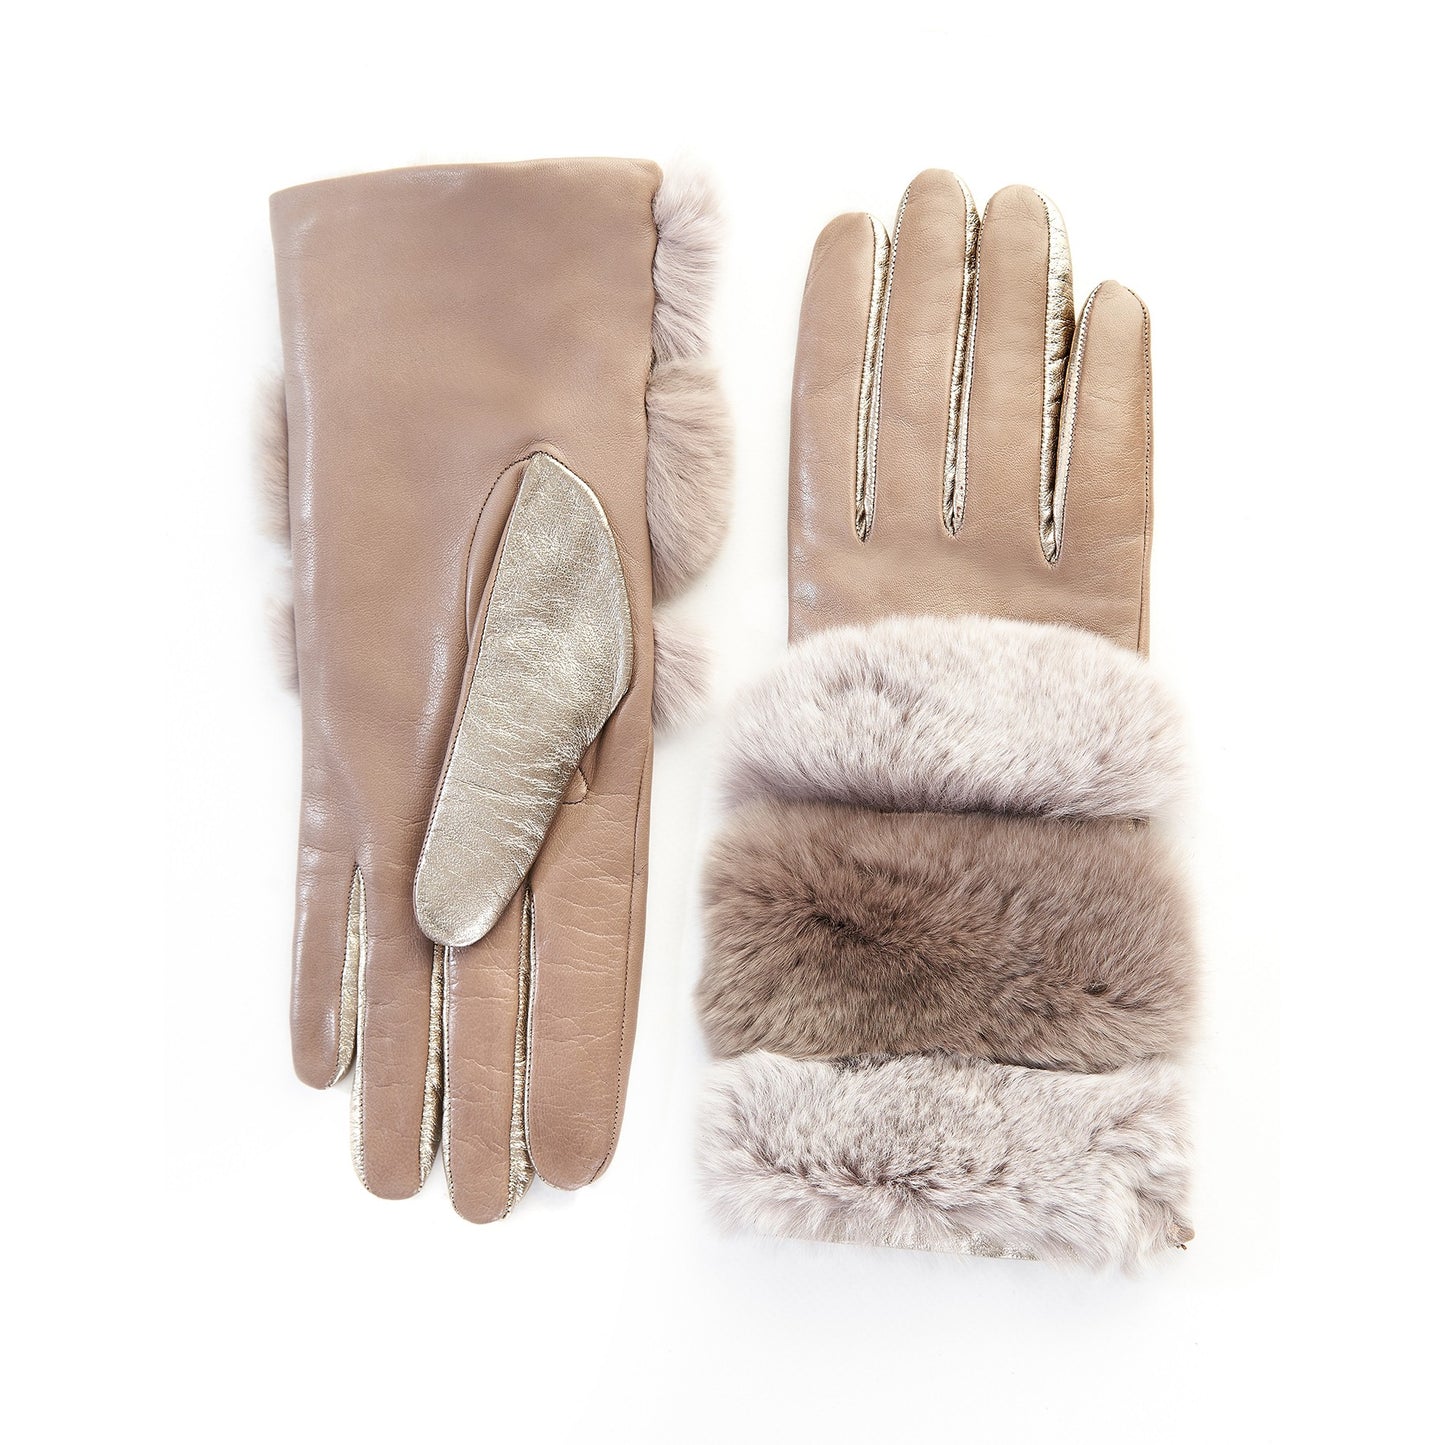 Women's gloves in tortora and gold nappa leather with natural fur